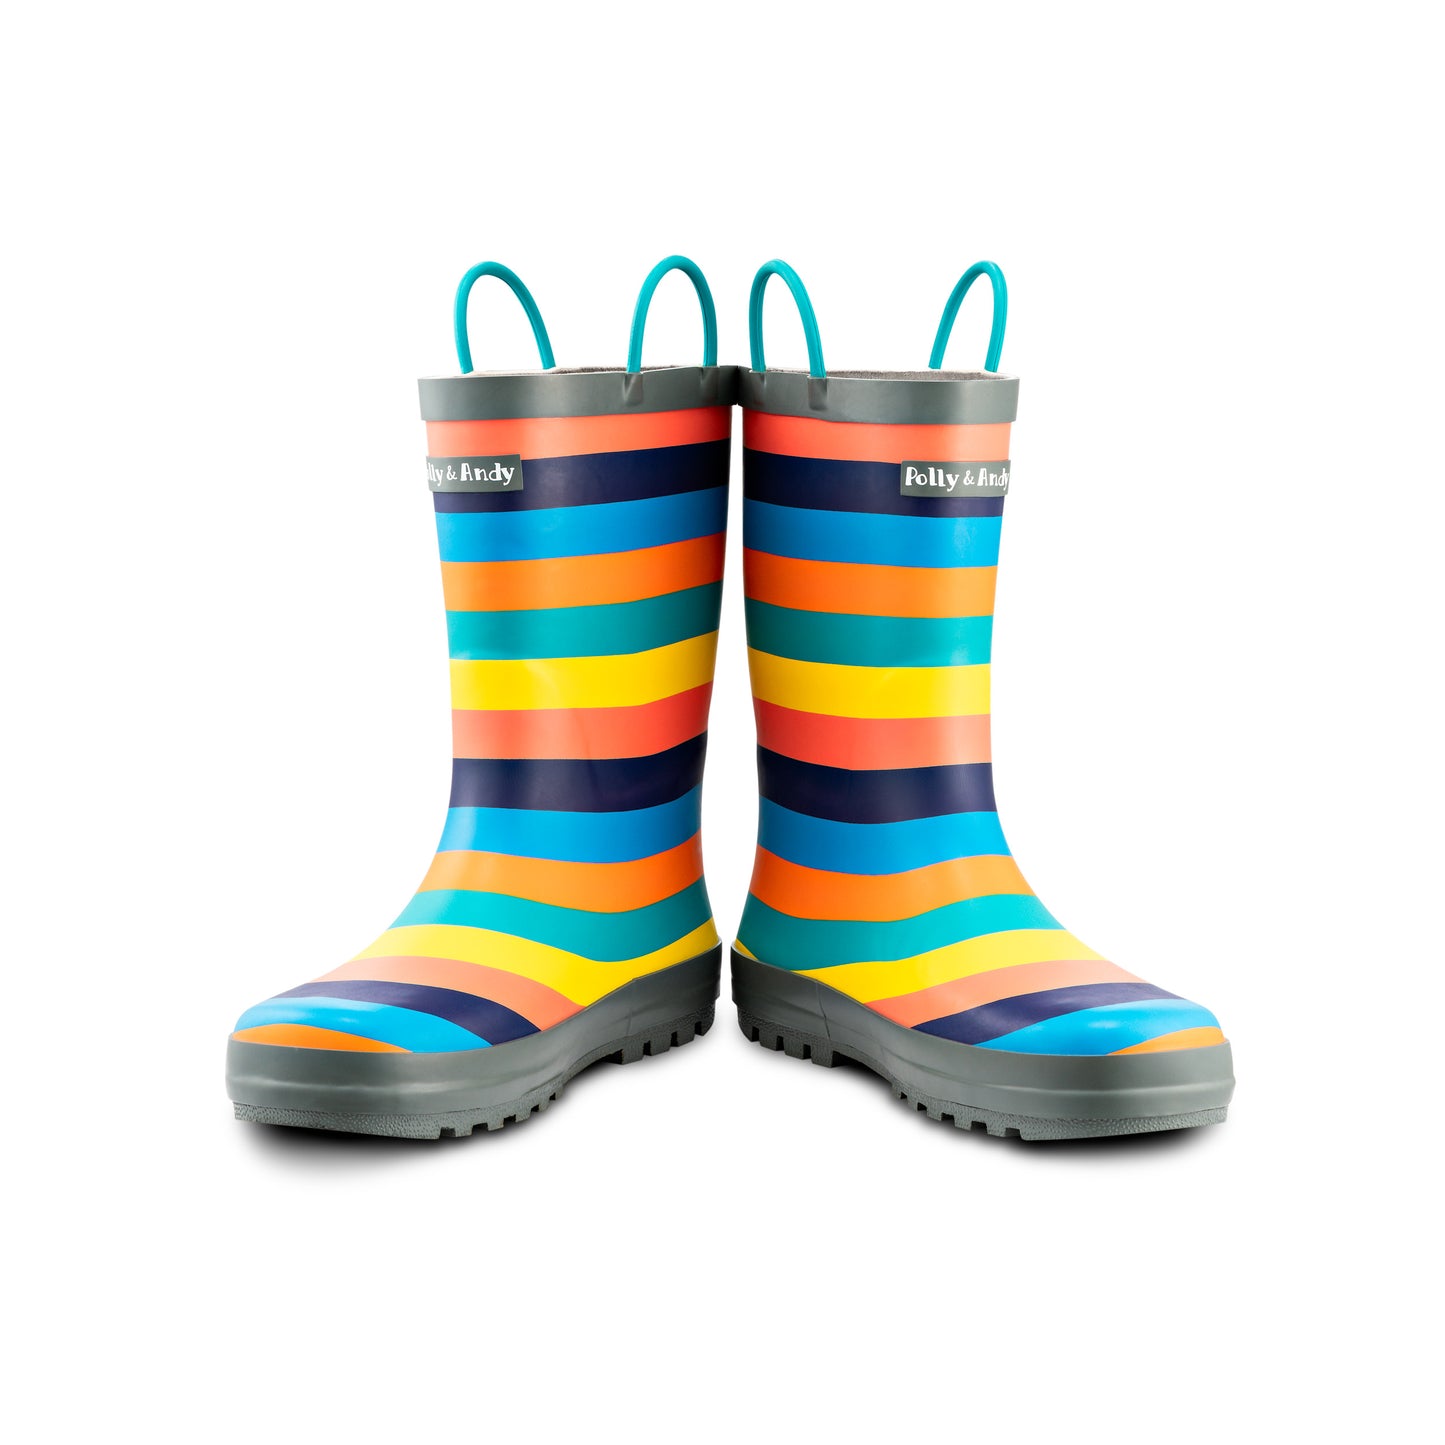 Order now to get your Sustainable Rainboots which Includes FREE shipping AND a free pair of rainbow knee high bamboo socks for all of April!